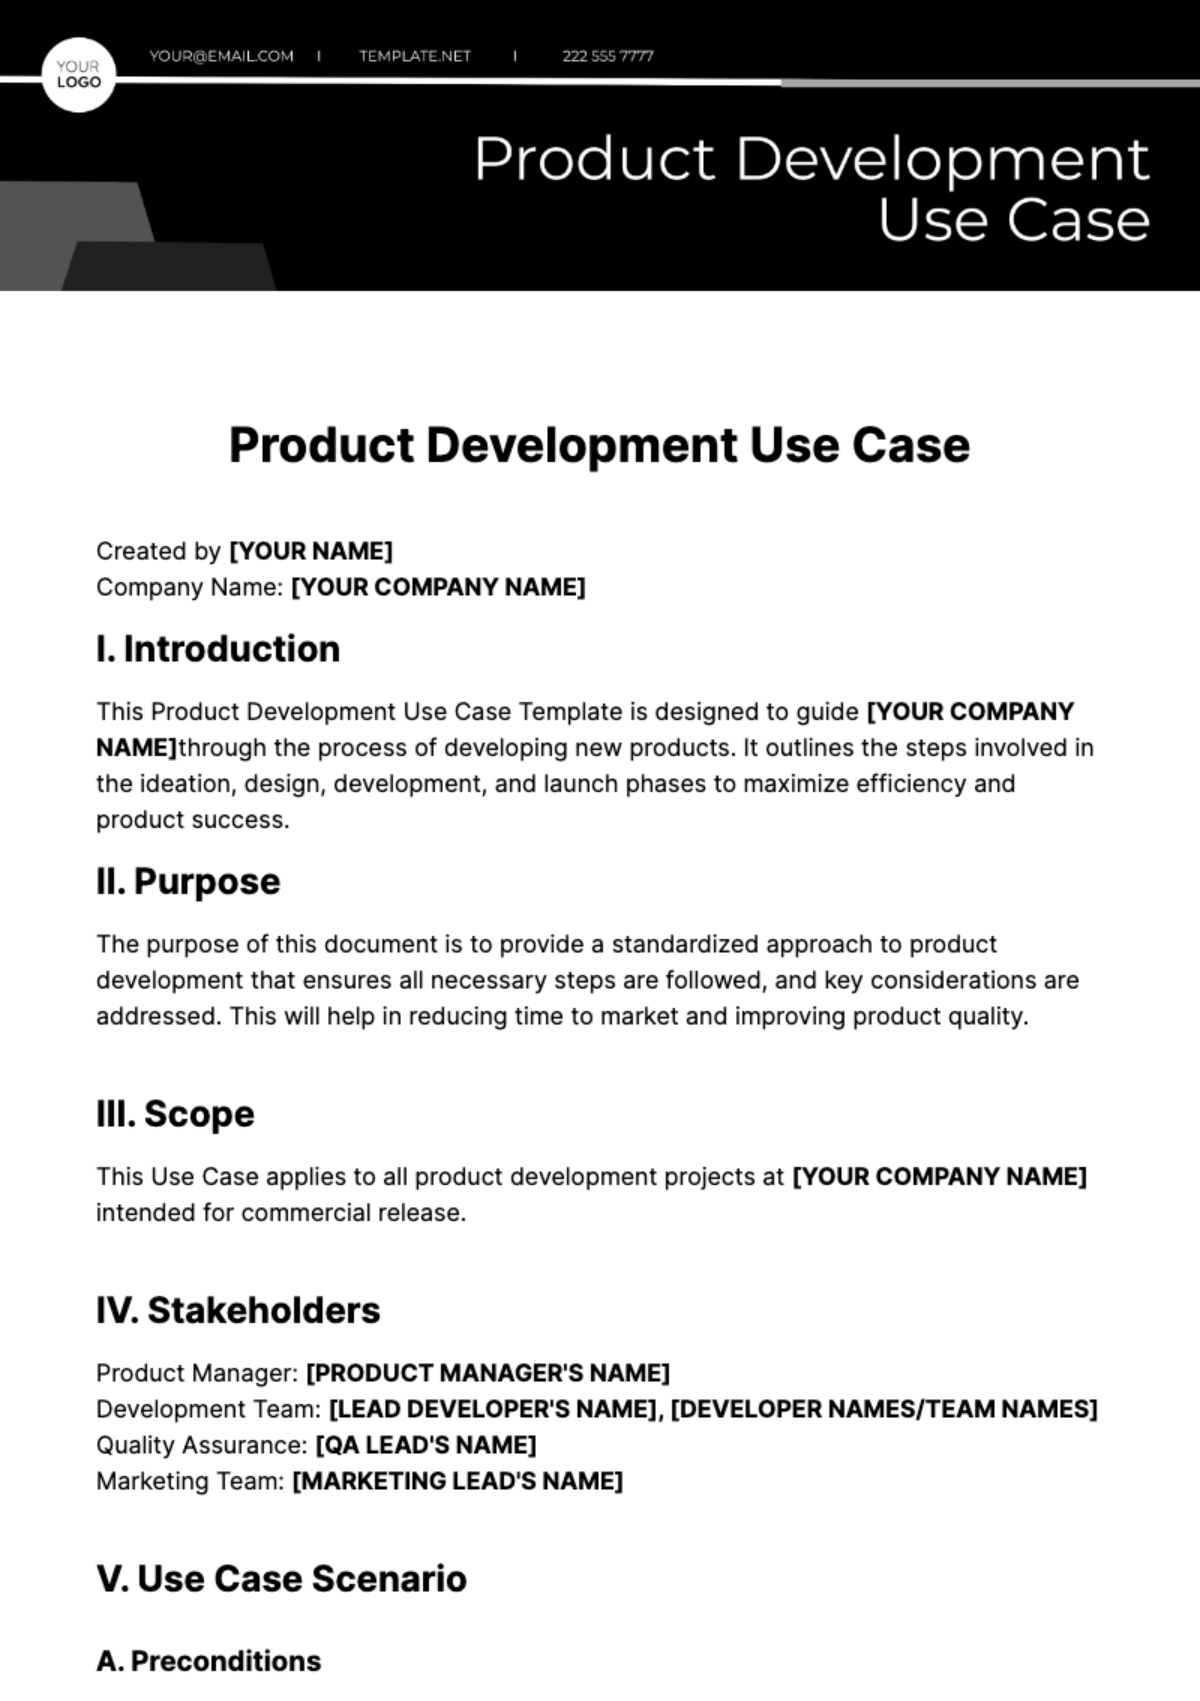 Product Development Use Case Template